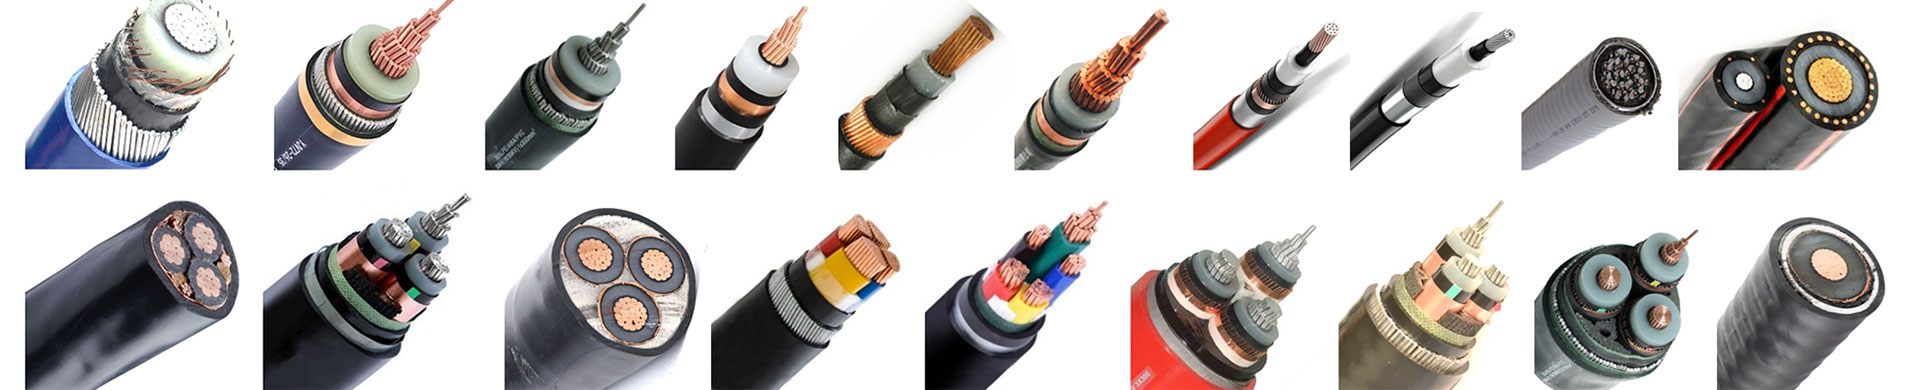 Cable 01